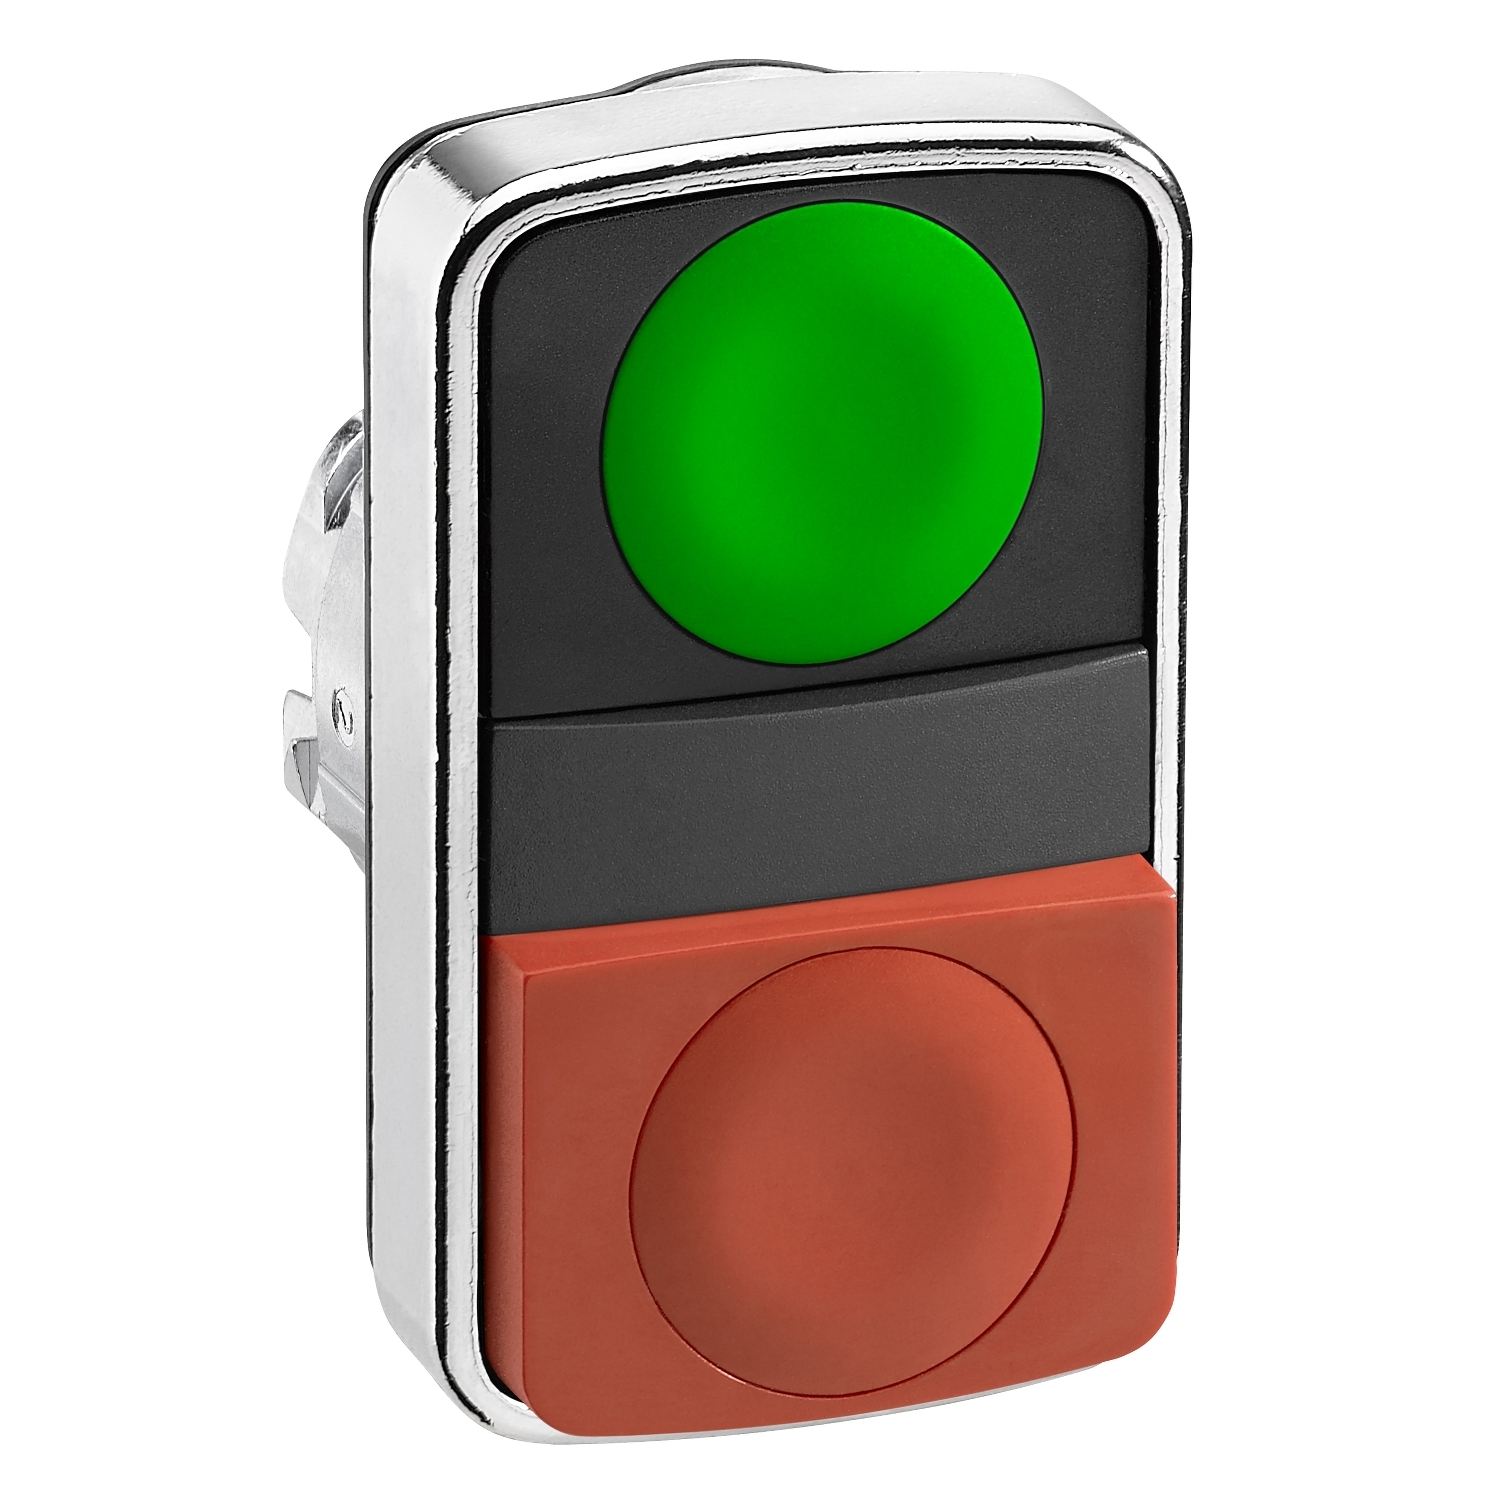 Double-headed push button head, Harmony XB4, metal, 22mm, 1 green flush unmarked+1 red projecting unmarked